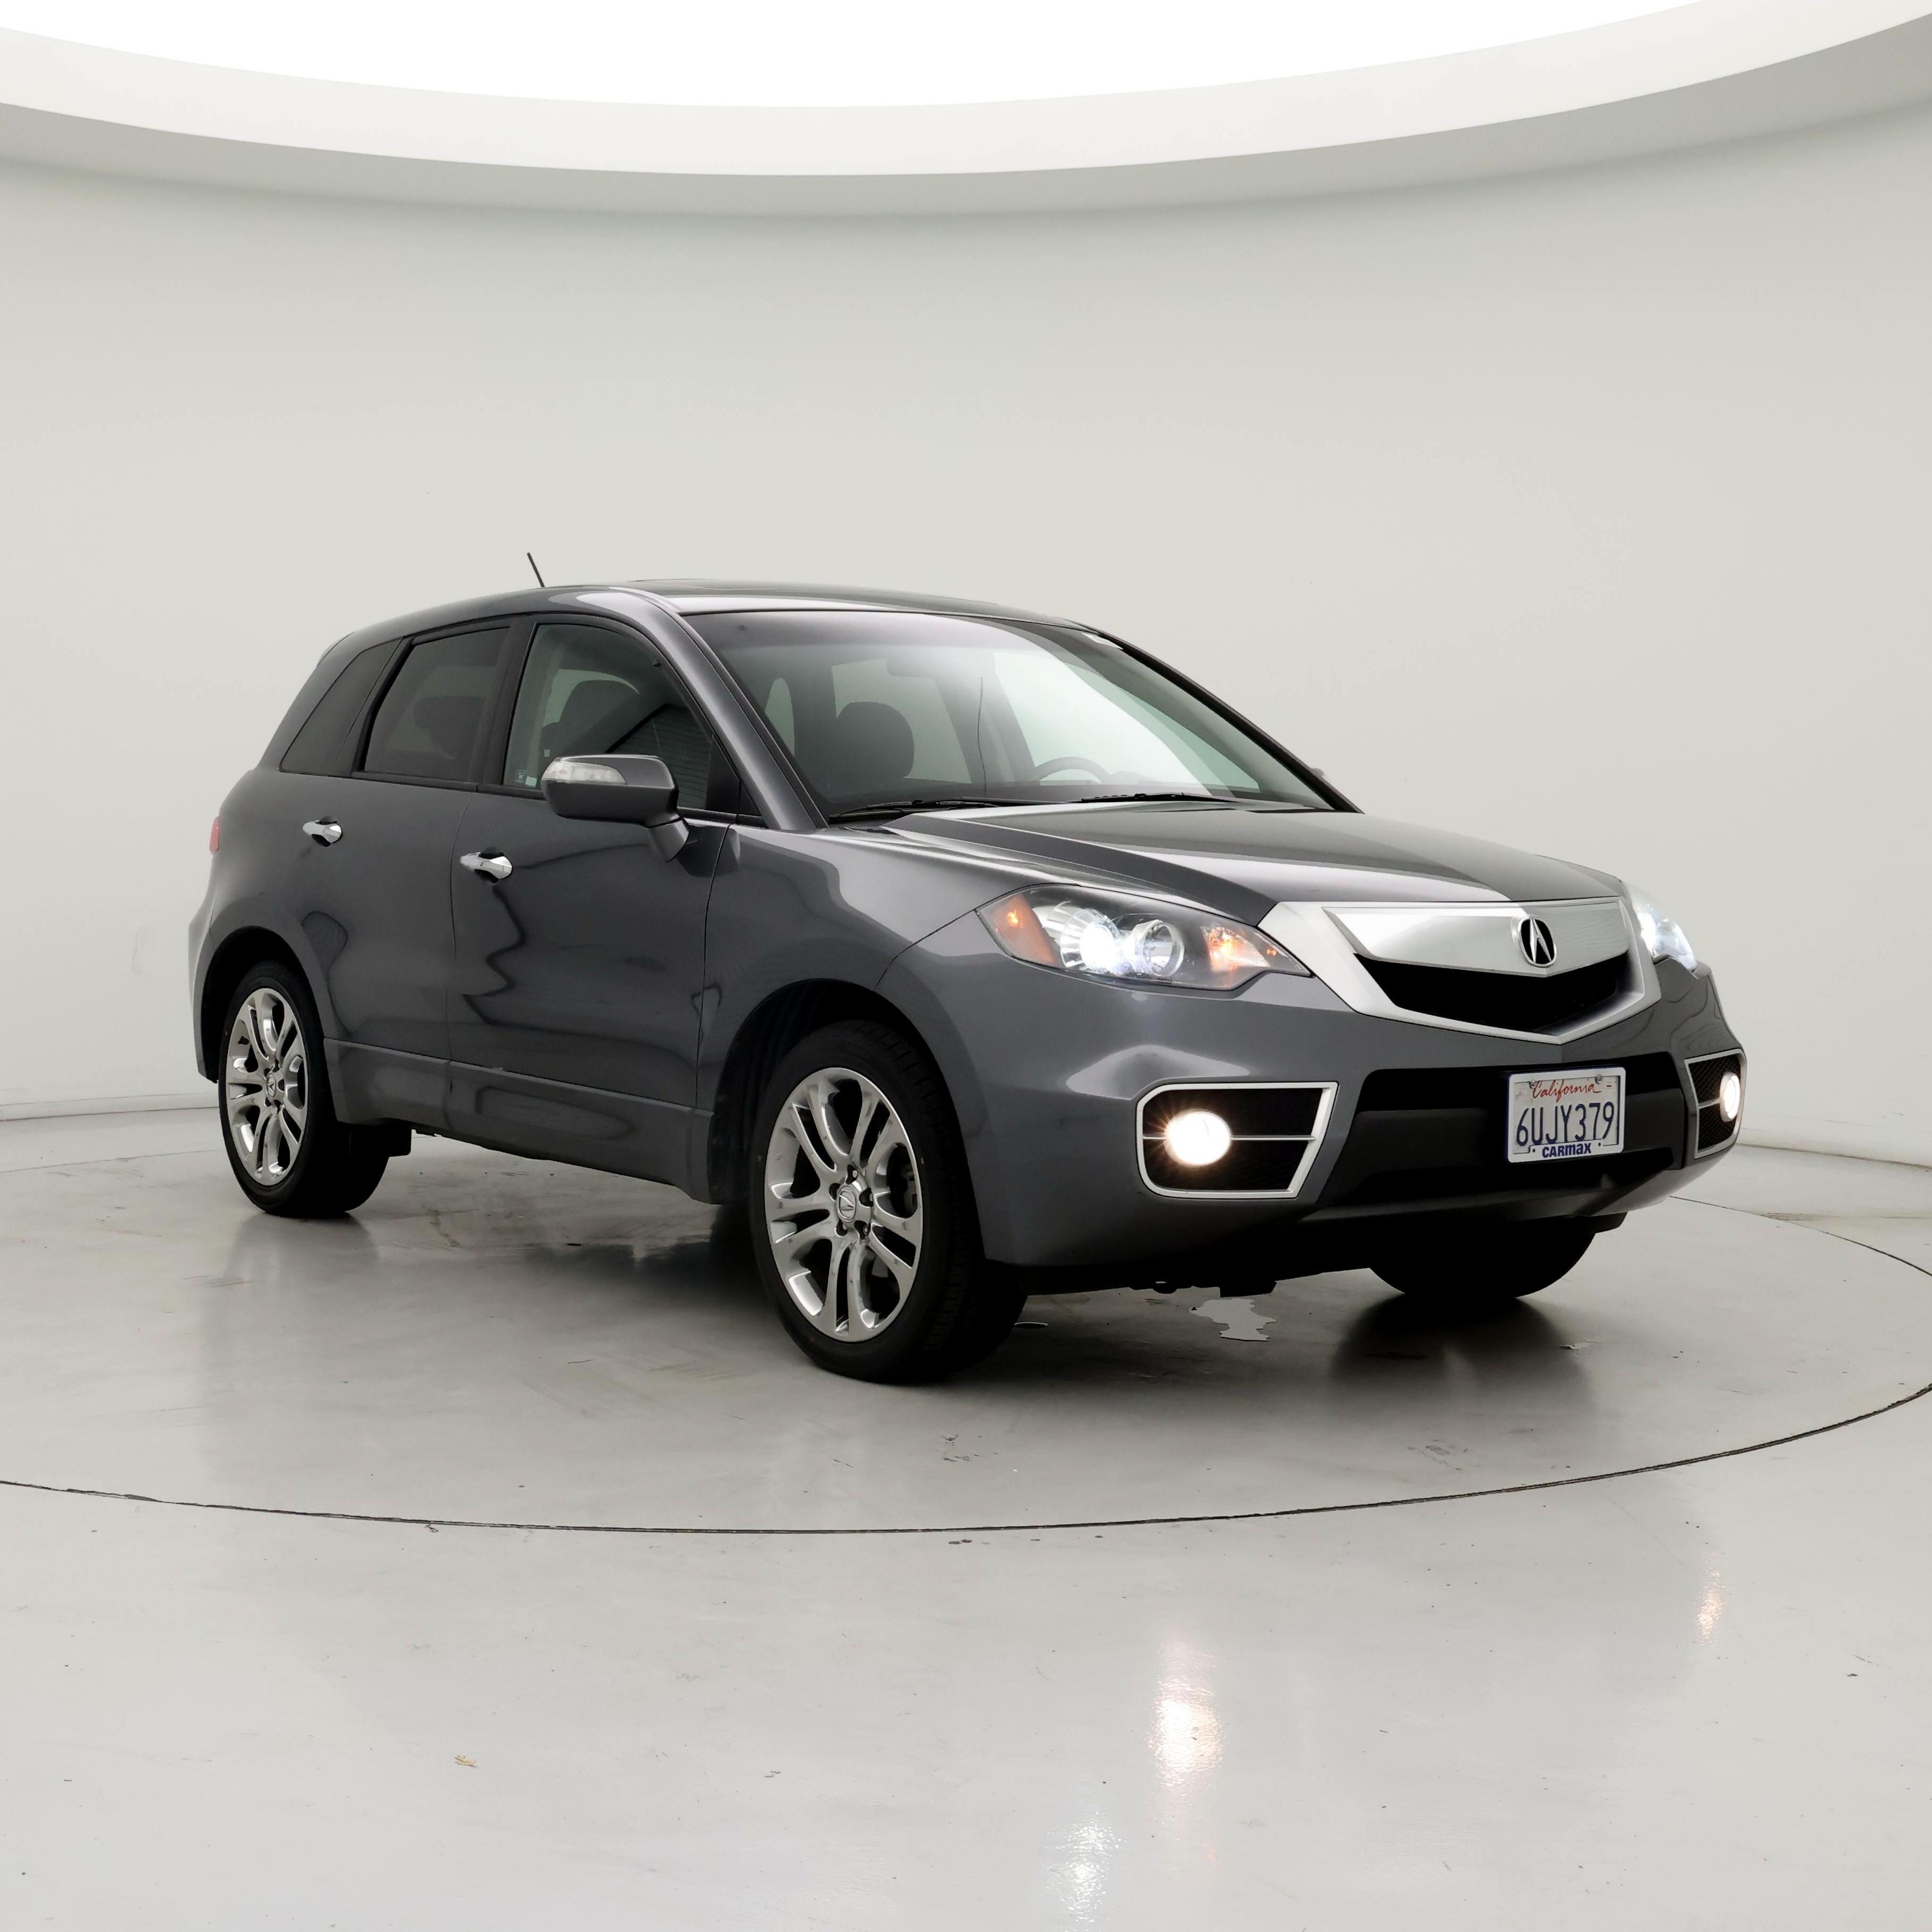 2012 Acura RDX SH-AWD with Technology Package